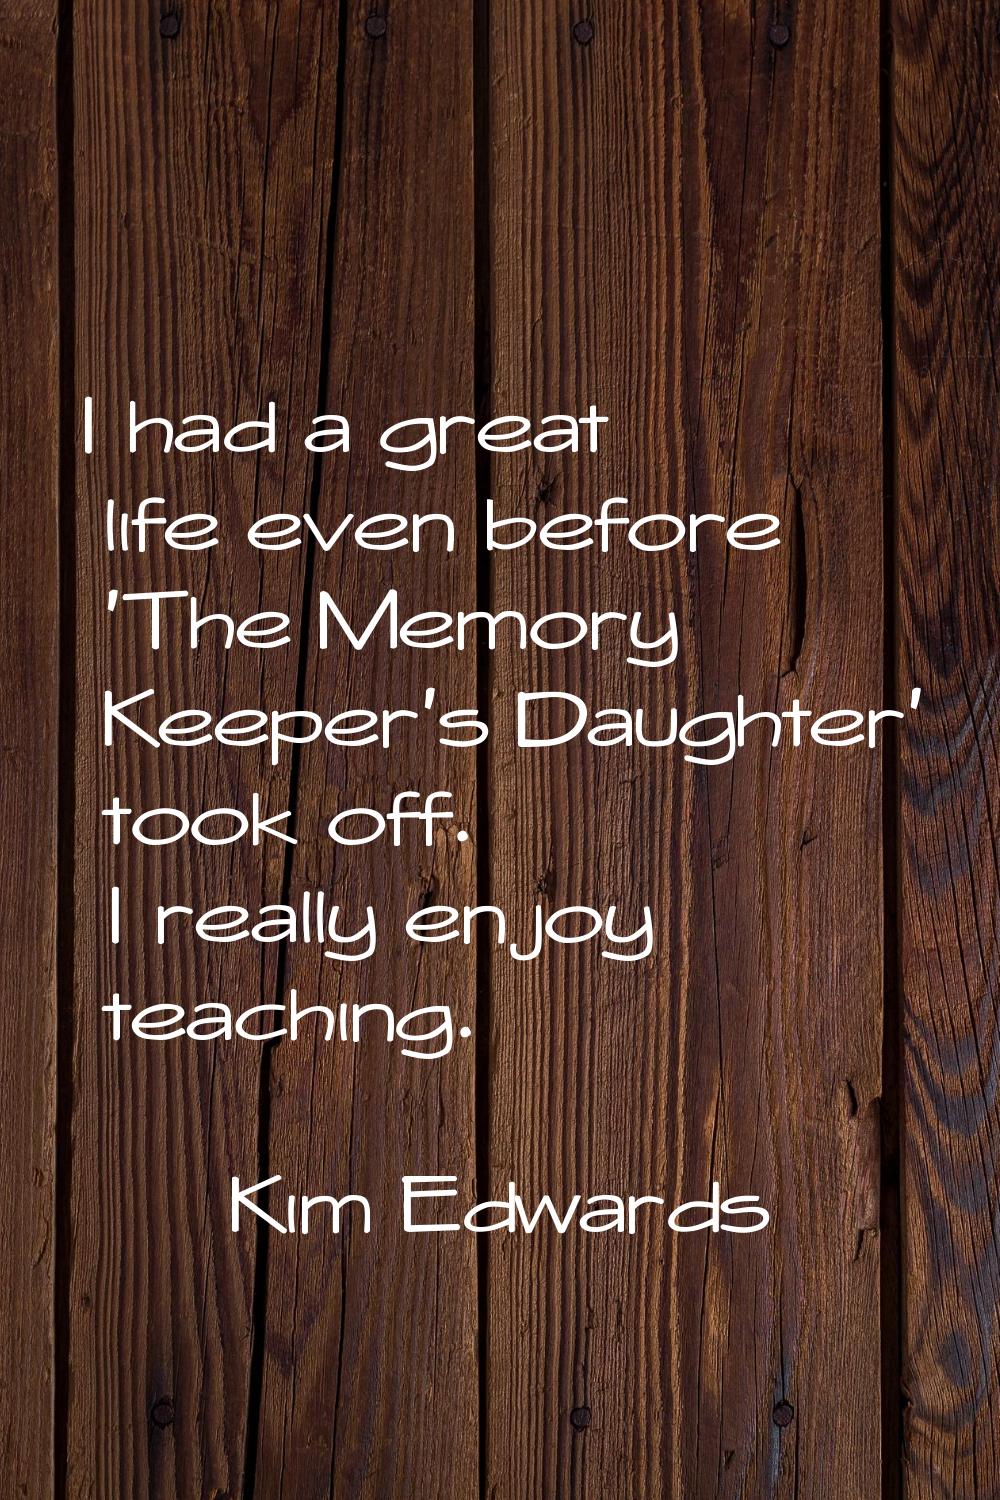 I had a great life even before 'The Memory Keeper's Daughter' took off. I really enjoy teaching.